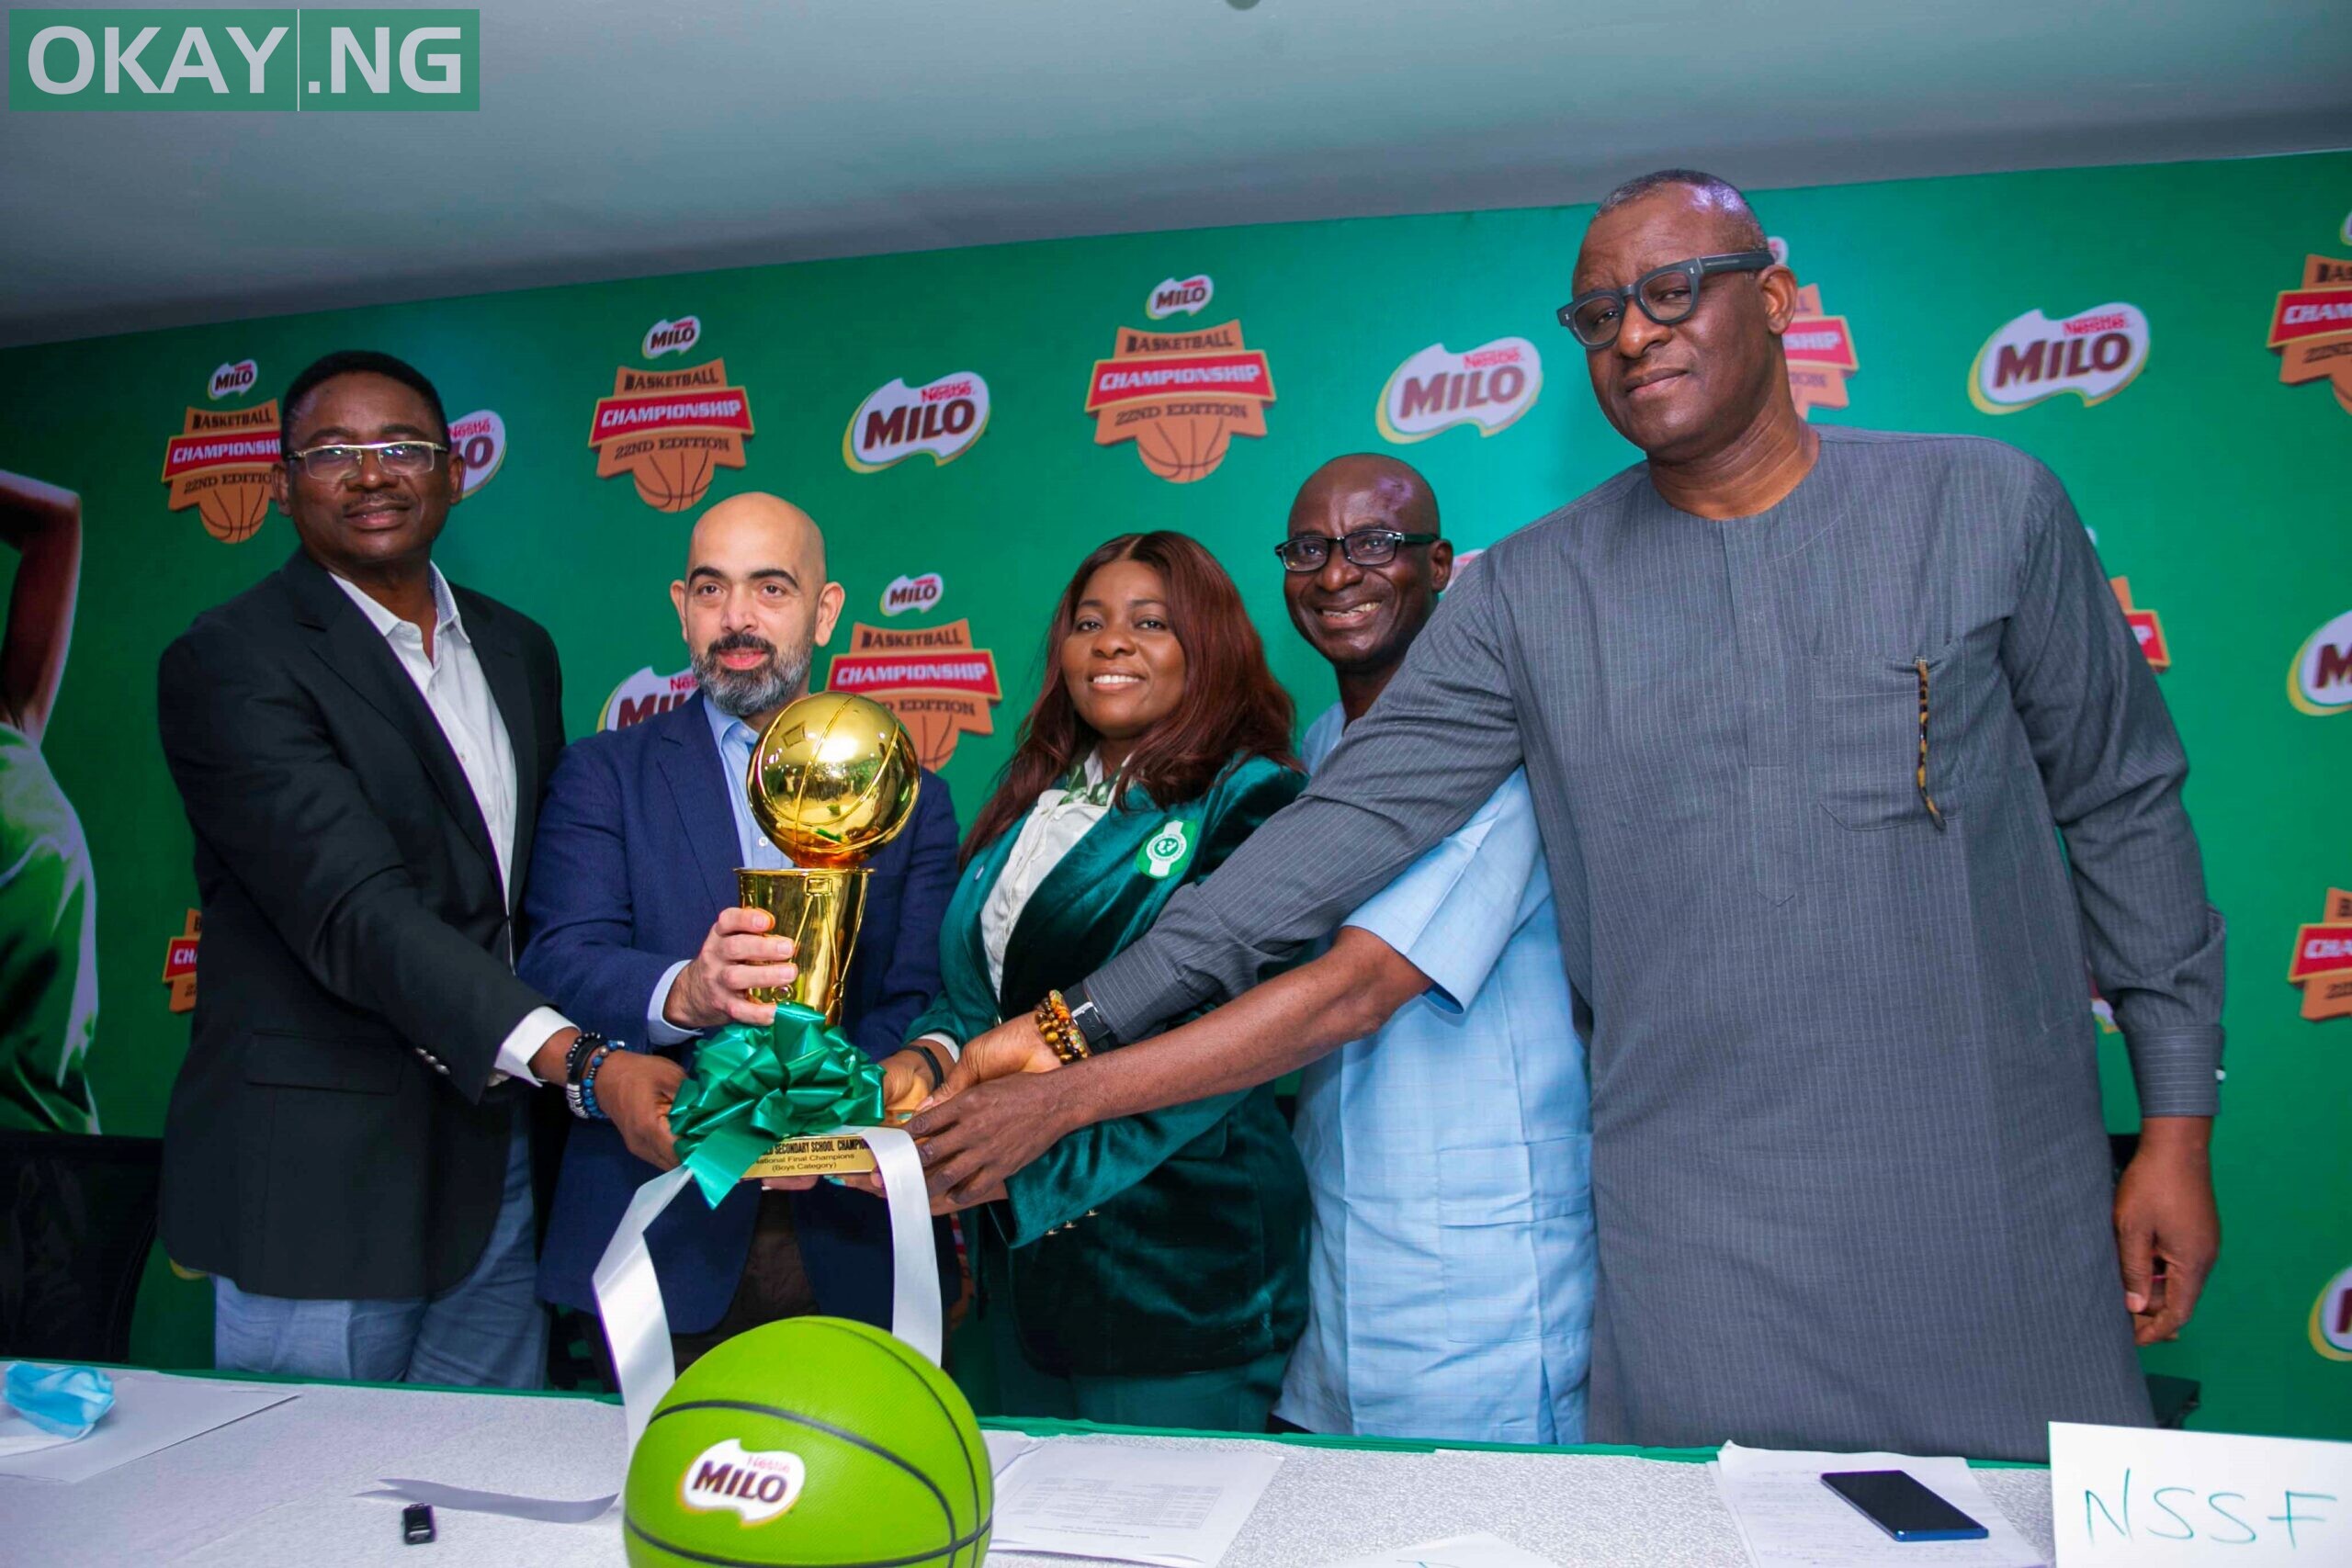 (L-R) Olutayo Olatunji – Category Manager Beverages at Nestlé Nigeria PLC, Wassim El-Husseini – Managing Director and Chief Executive Officer at Nestlé Nigeria PLC, Olabisi Joseph – President of Nigeria Schools Sports Federation (NSSF), Lanre Balogun – Executive Secretary of National Collegiate Sports Foundation (NCSF) and Babs Ogunade representing the Nigeria Basketball Federation (NBBF) during the Press Conference of the 22nd Milo Basketball Championship at the Nestlé Head Office today